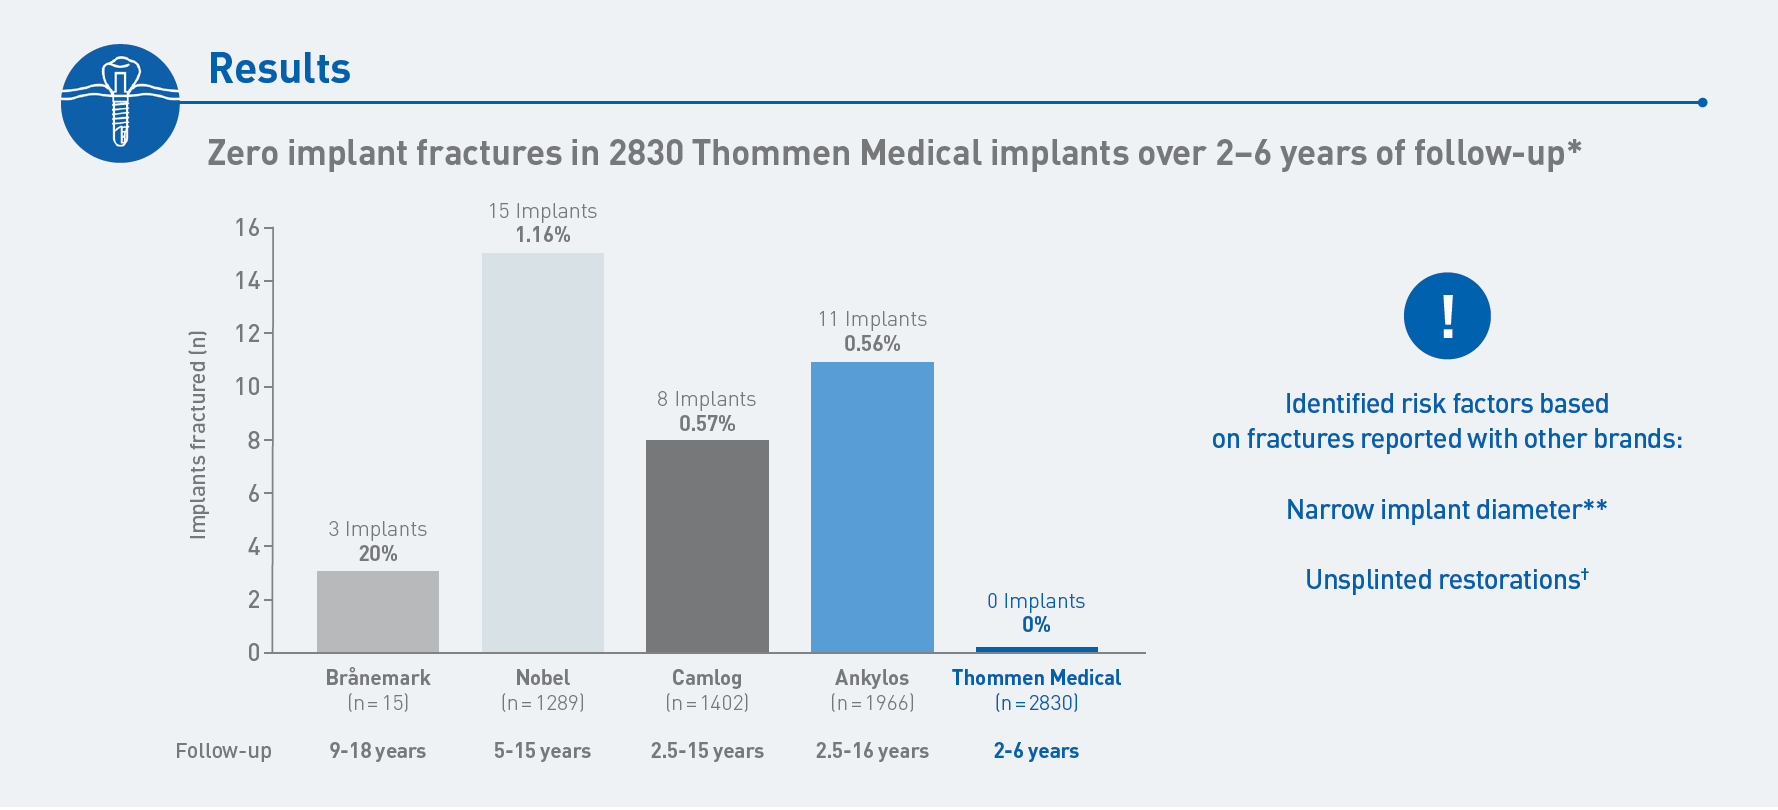 Zero implant fractures in 2830 Thommen Medical implants over 2–6 years of follow-up*